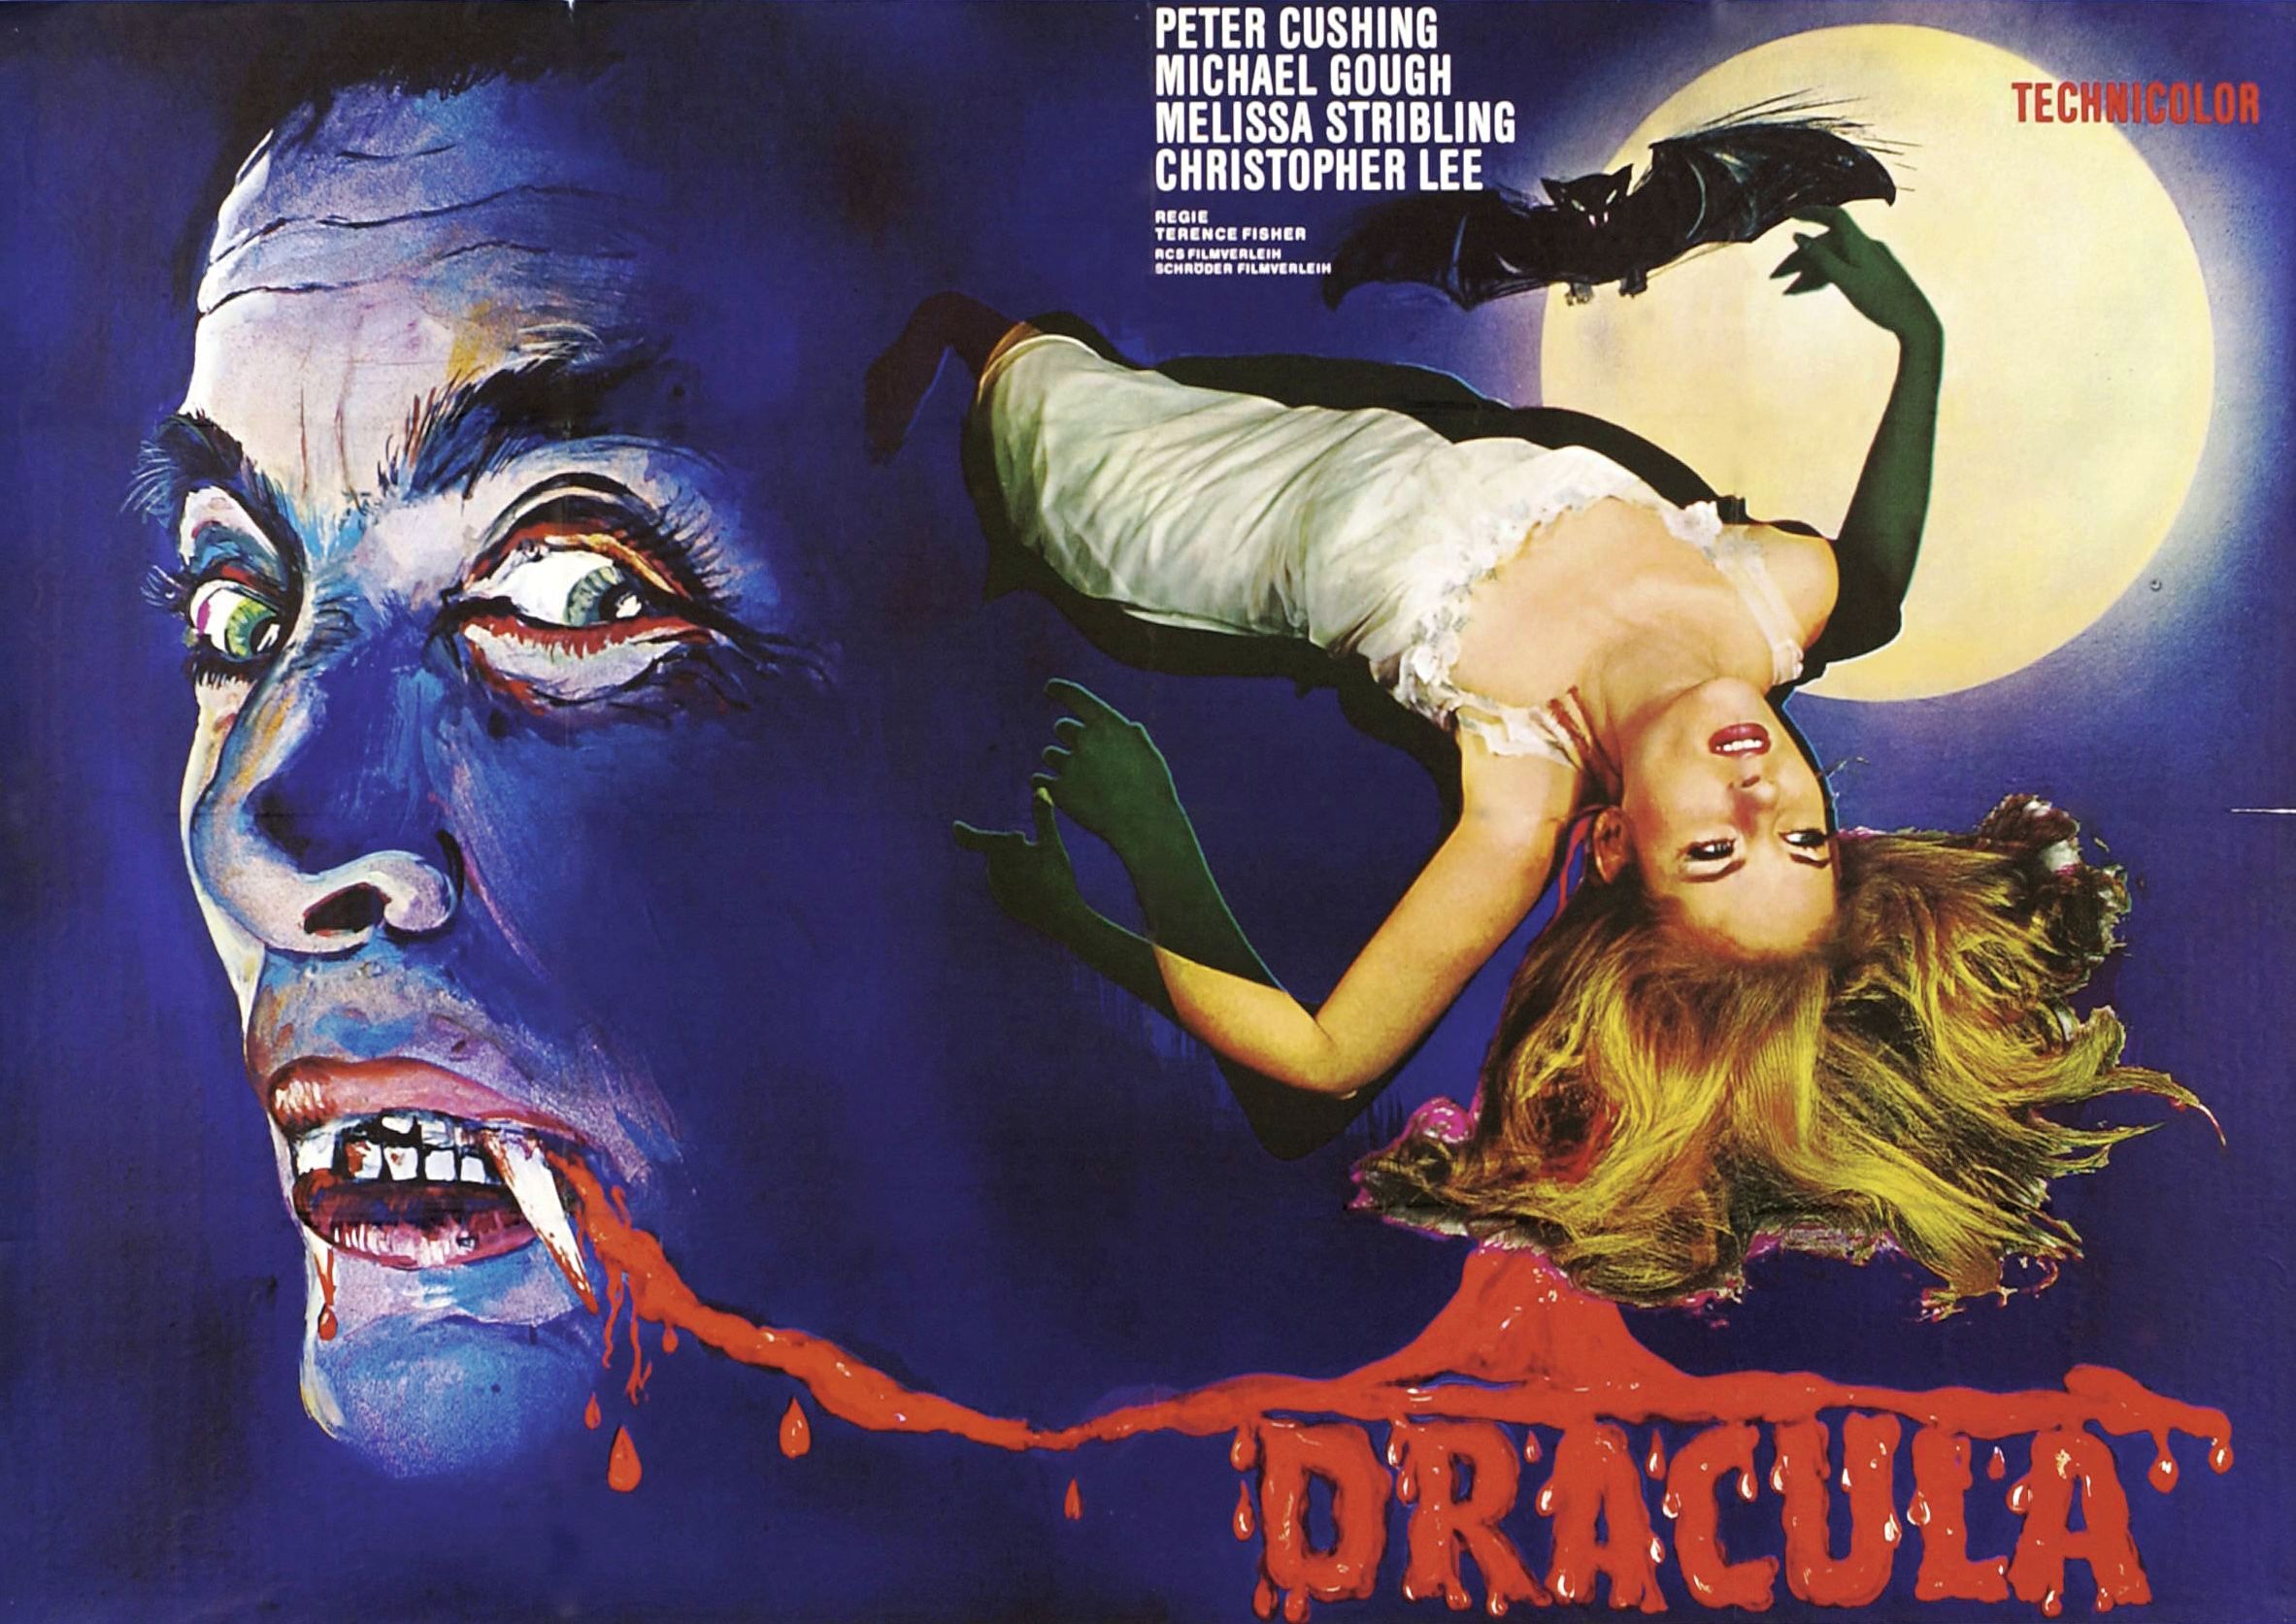 Movie Horror Of Dracula HD Wallpaper | Background Image